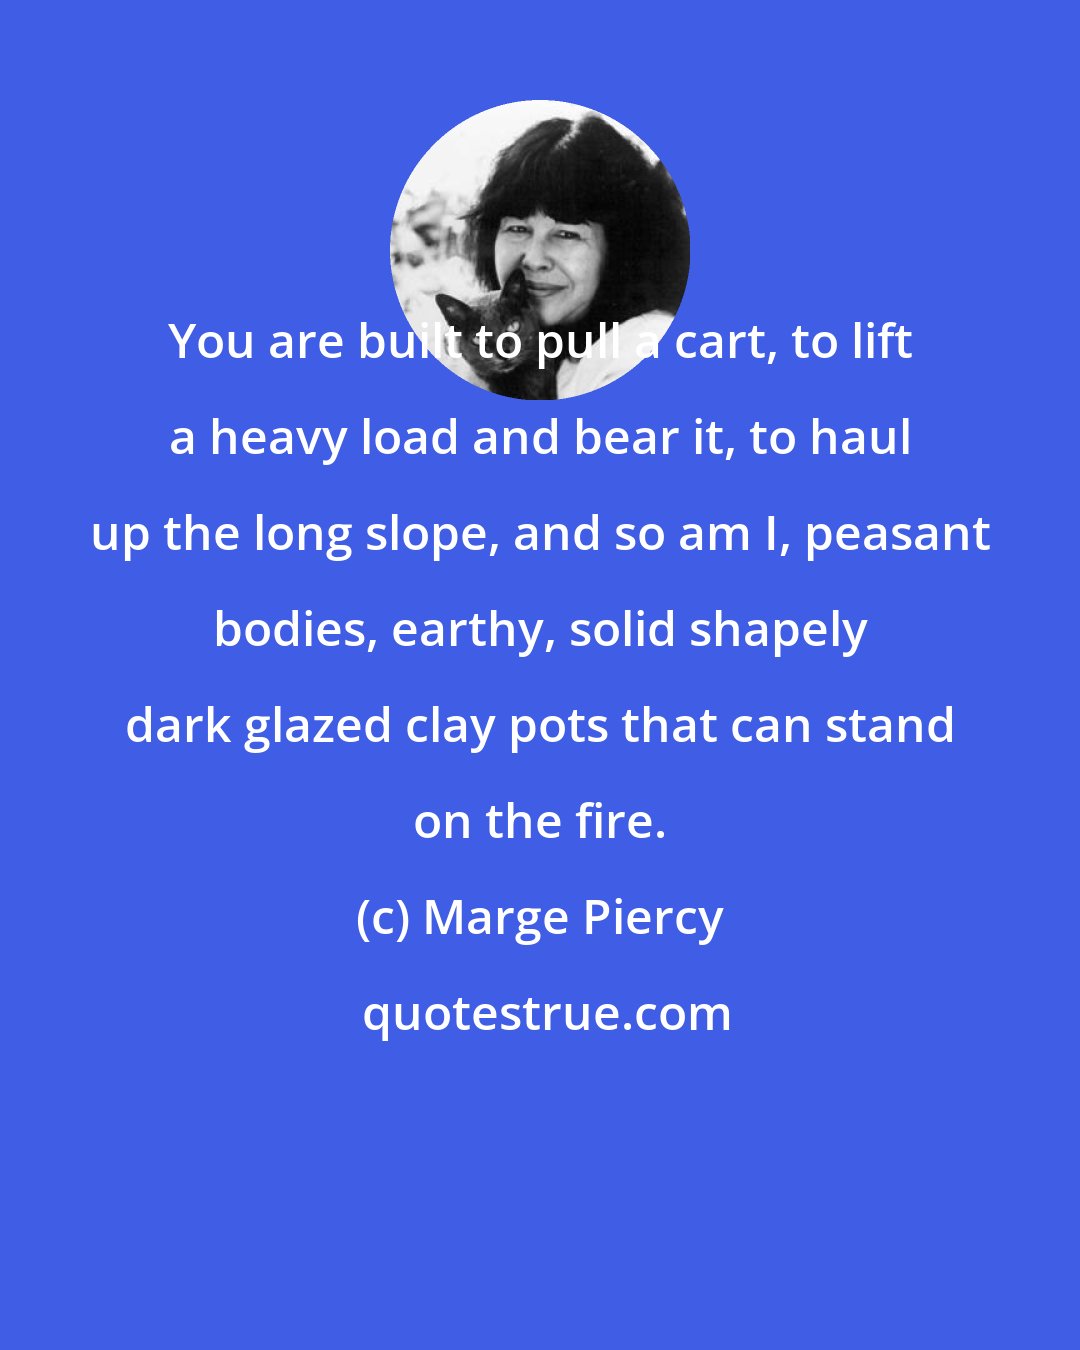 Marge Piercy: You are built to pull a cart, to lift a heavy load and bear it, to haul up the long slope, and so am I, peasant bodies, earthy, solid shapely dark glazed clay pots that can stand on the fire.